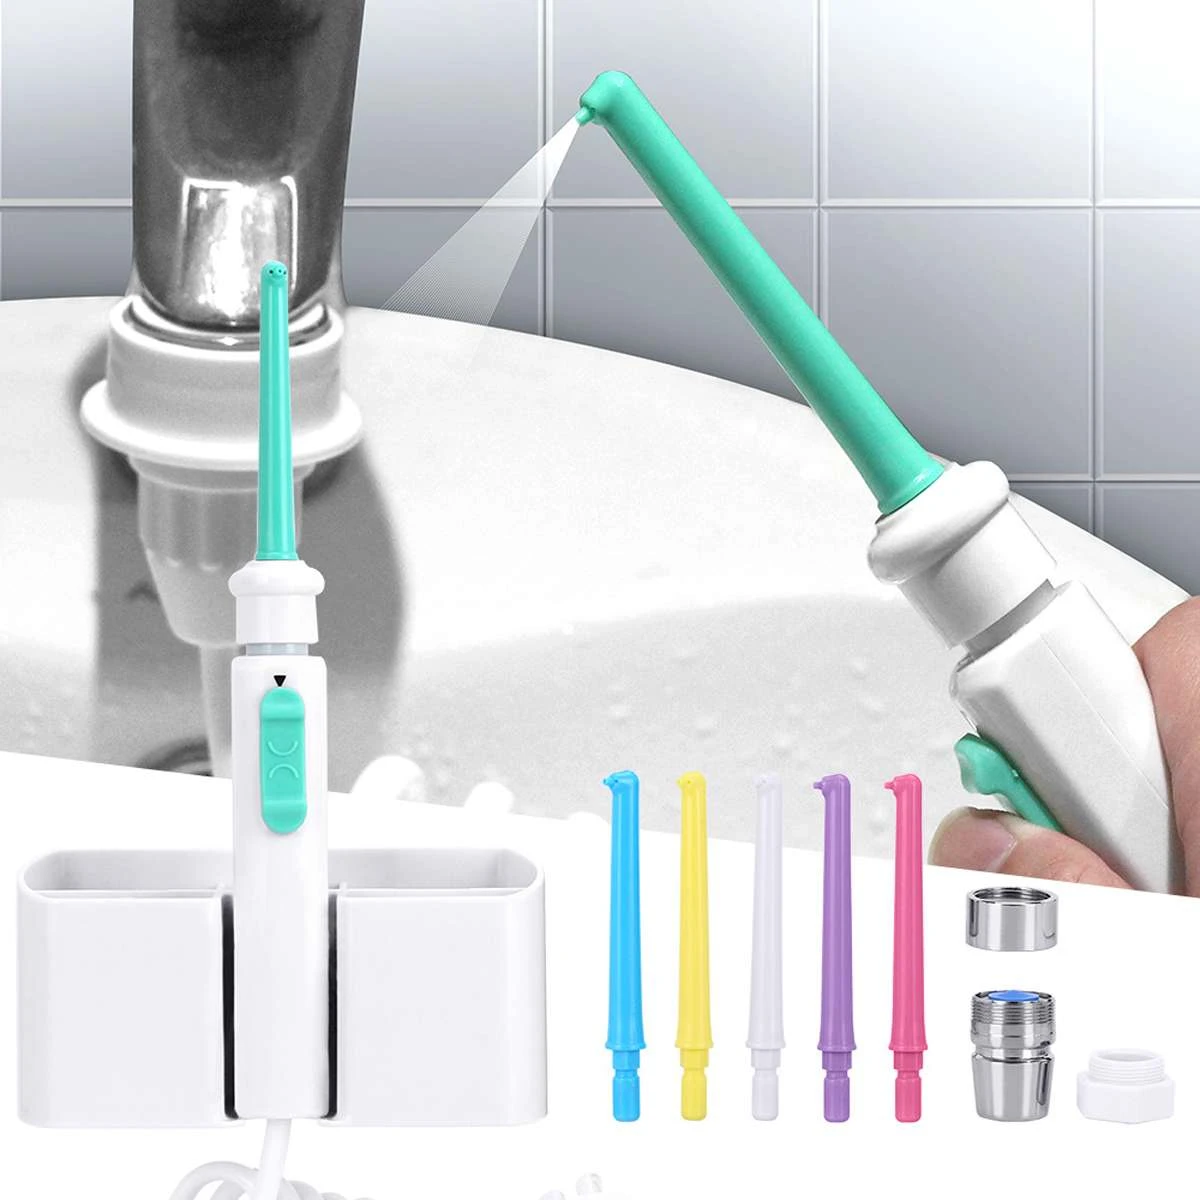 Faucet Water Dental Flosser+ 6 Nozzle Oral Jet Irrigator Interdental Brush Tooth SPA Cleaner Teeth Whitening Toothbrush Cleaning